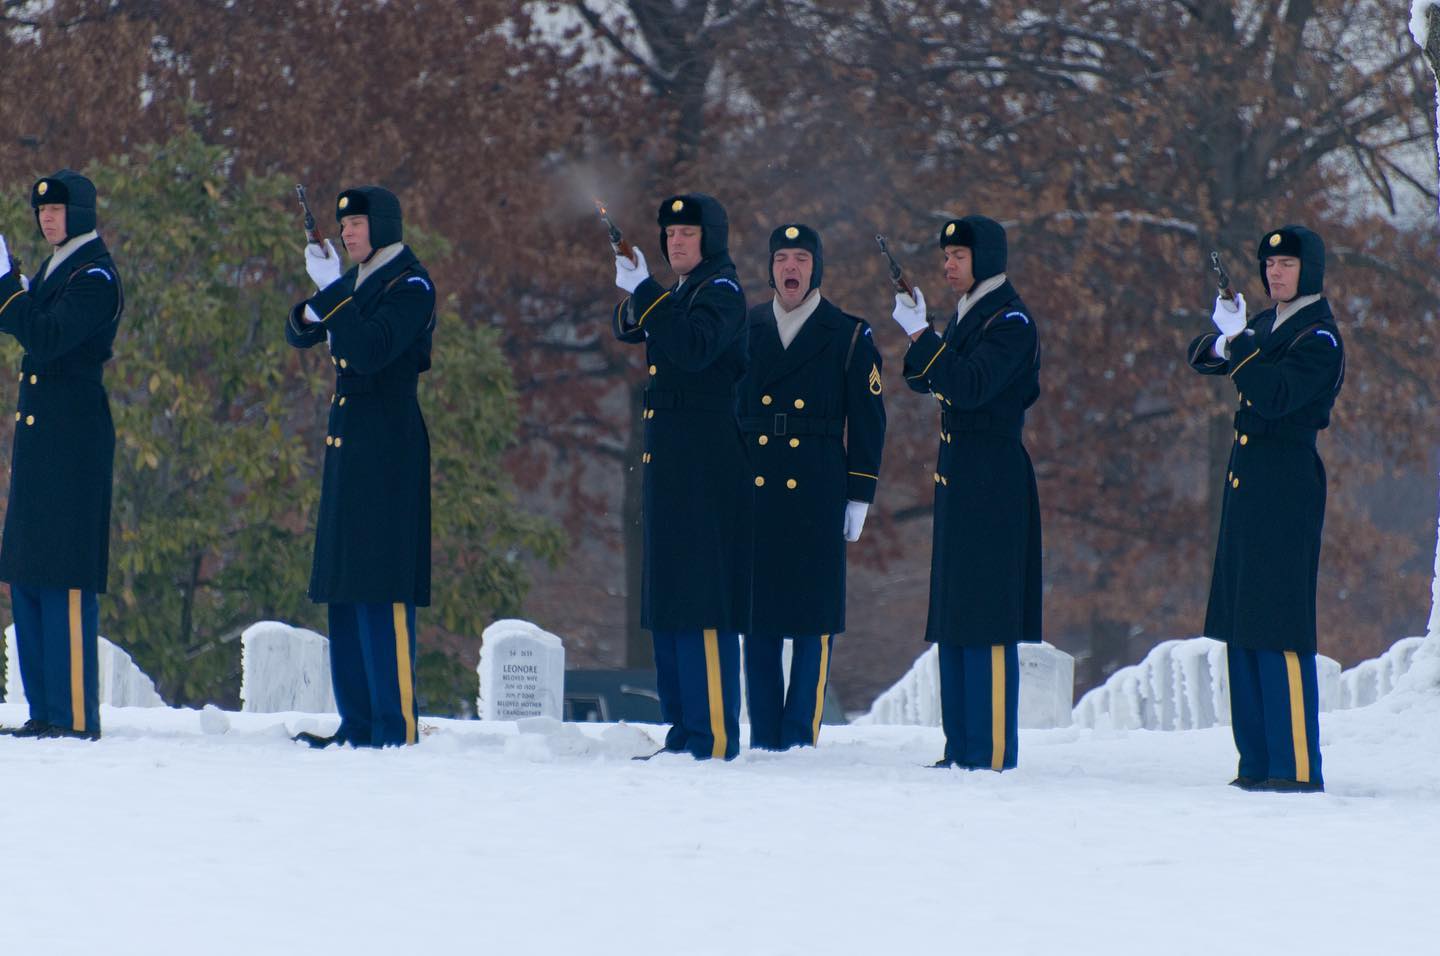 Soldiers in the US Army Old Guard fire three volleys during a funeral in the snow at Arlington National Cemetery.